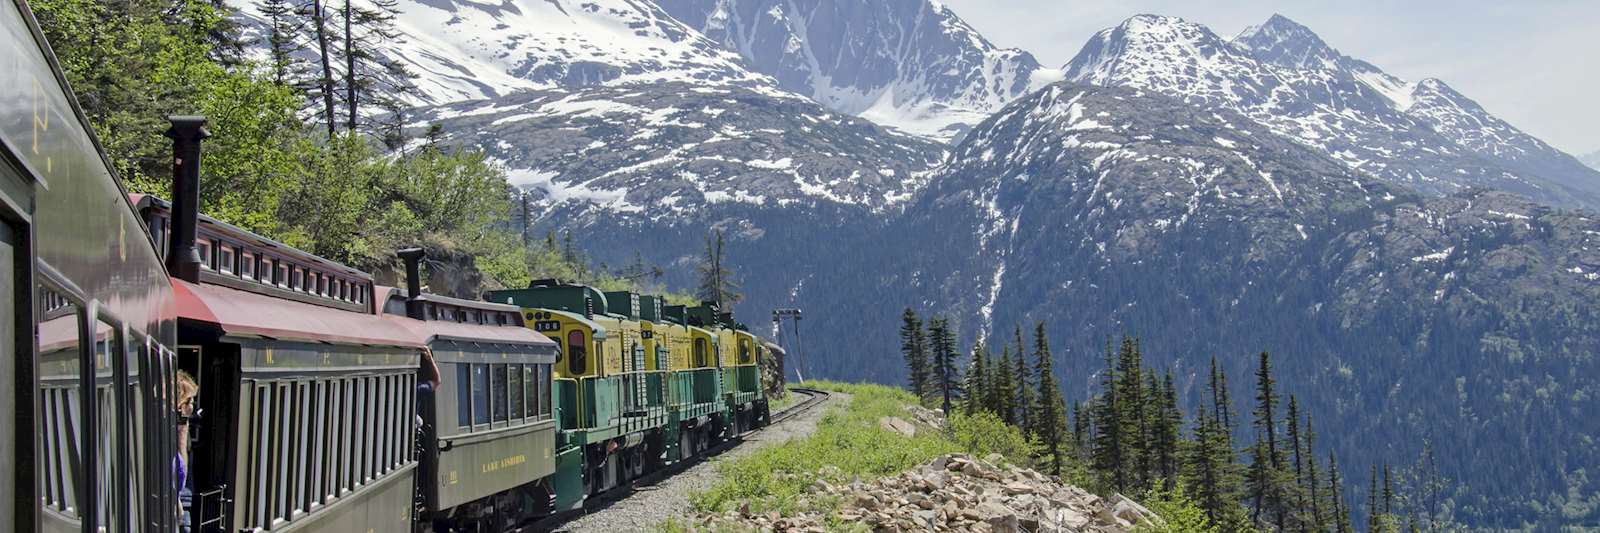 train trips from canada to alaska